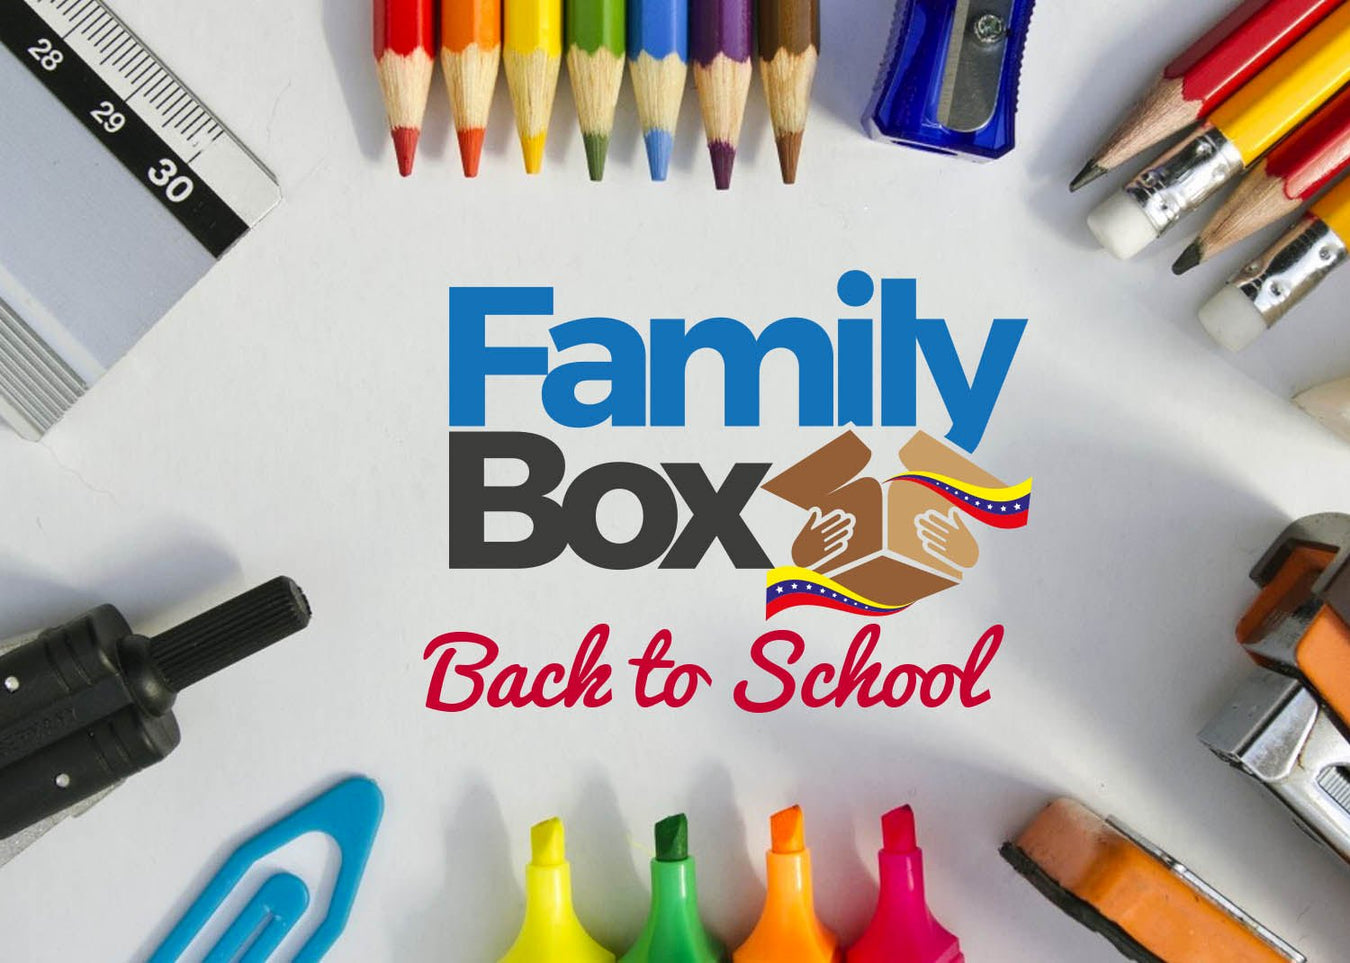 FamilyBox - Regreso a Clases - FamilyBox.Store